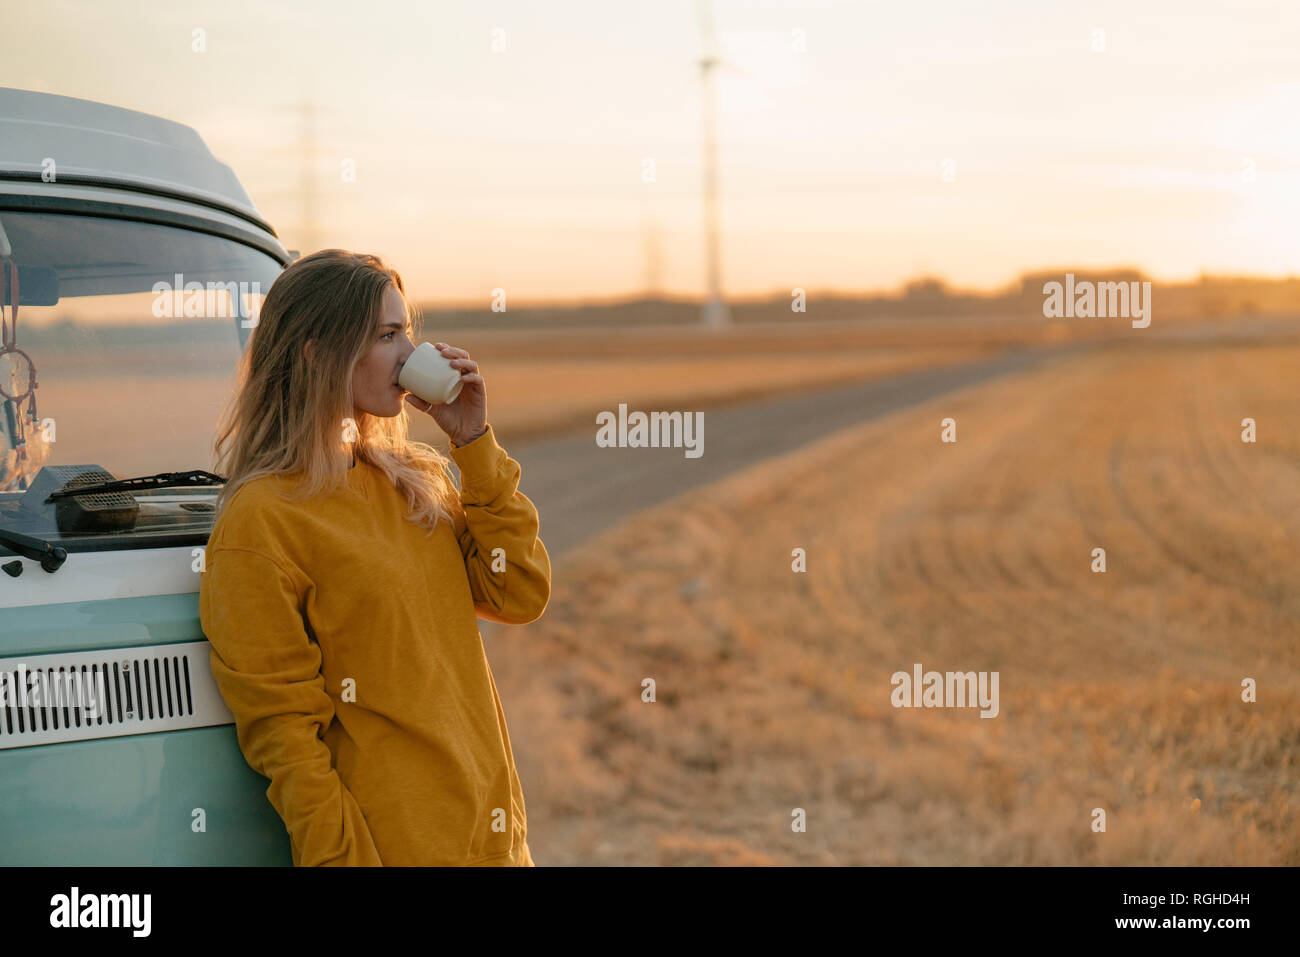 Young woman drinking from mug at camper van in rural landscape at sunset Stock Photo